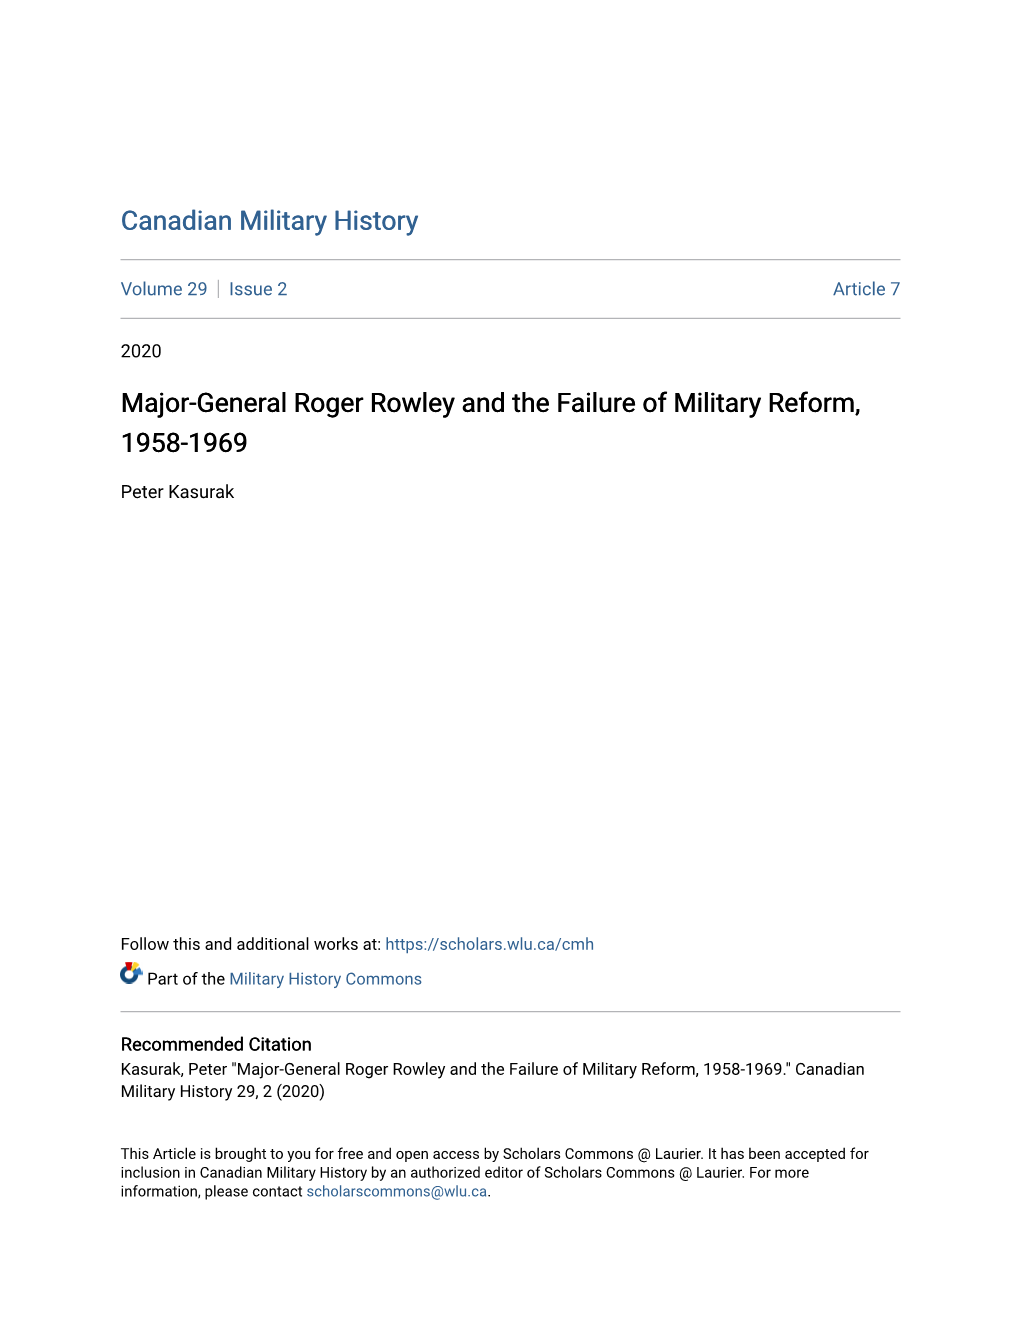 Major-General Roger Rowley and the Failure of Military Reform, 1958-1969